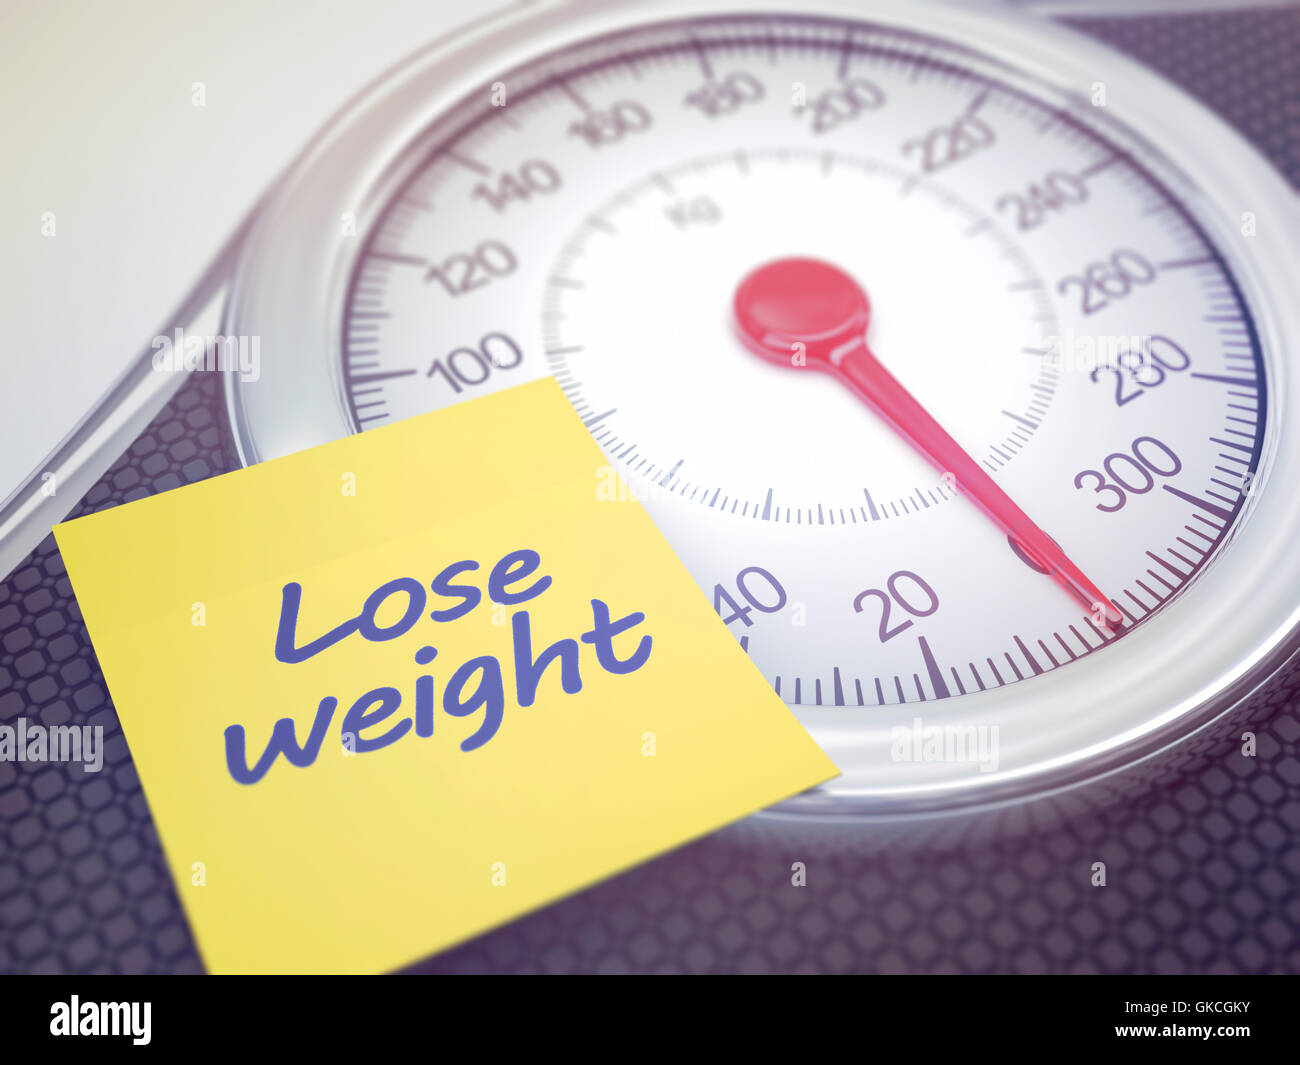 Weight scale with reminder to lose weight. Depth of field with focus on the reminder. Stock Photo